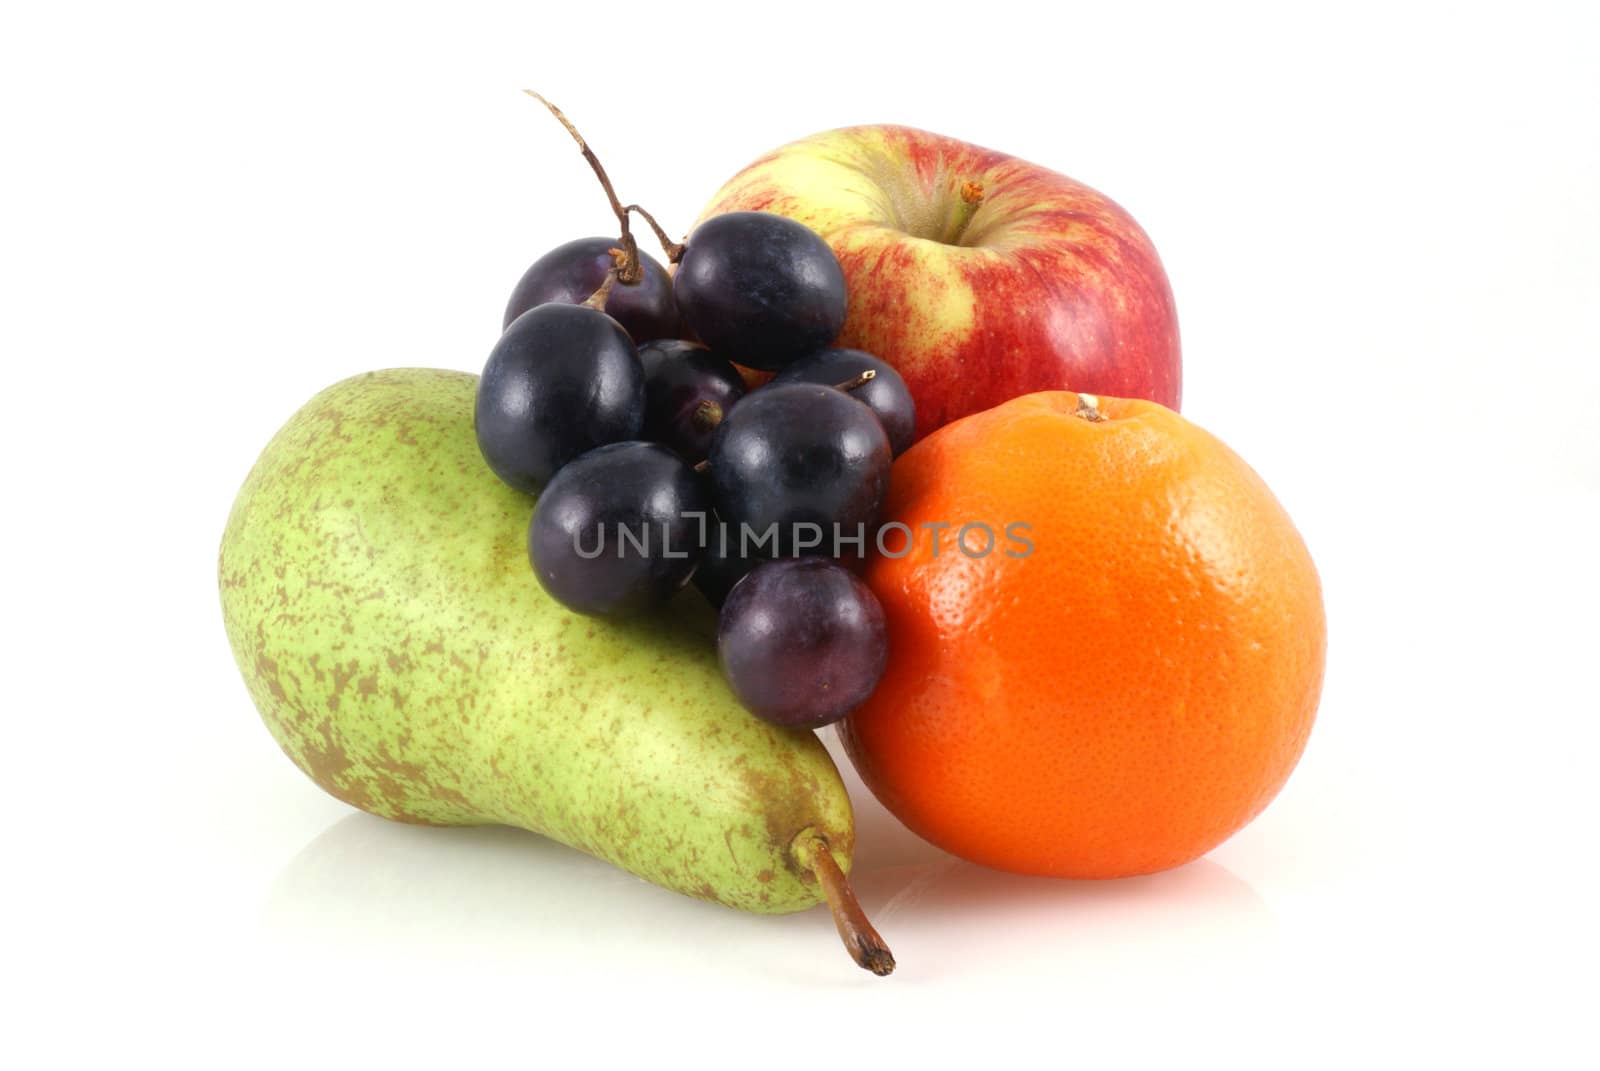 Apple, pear, orange and a bunch of grapes on a white background.                